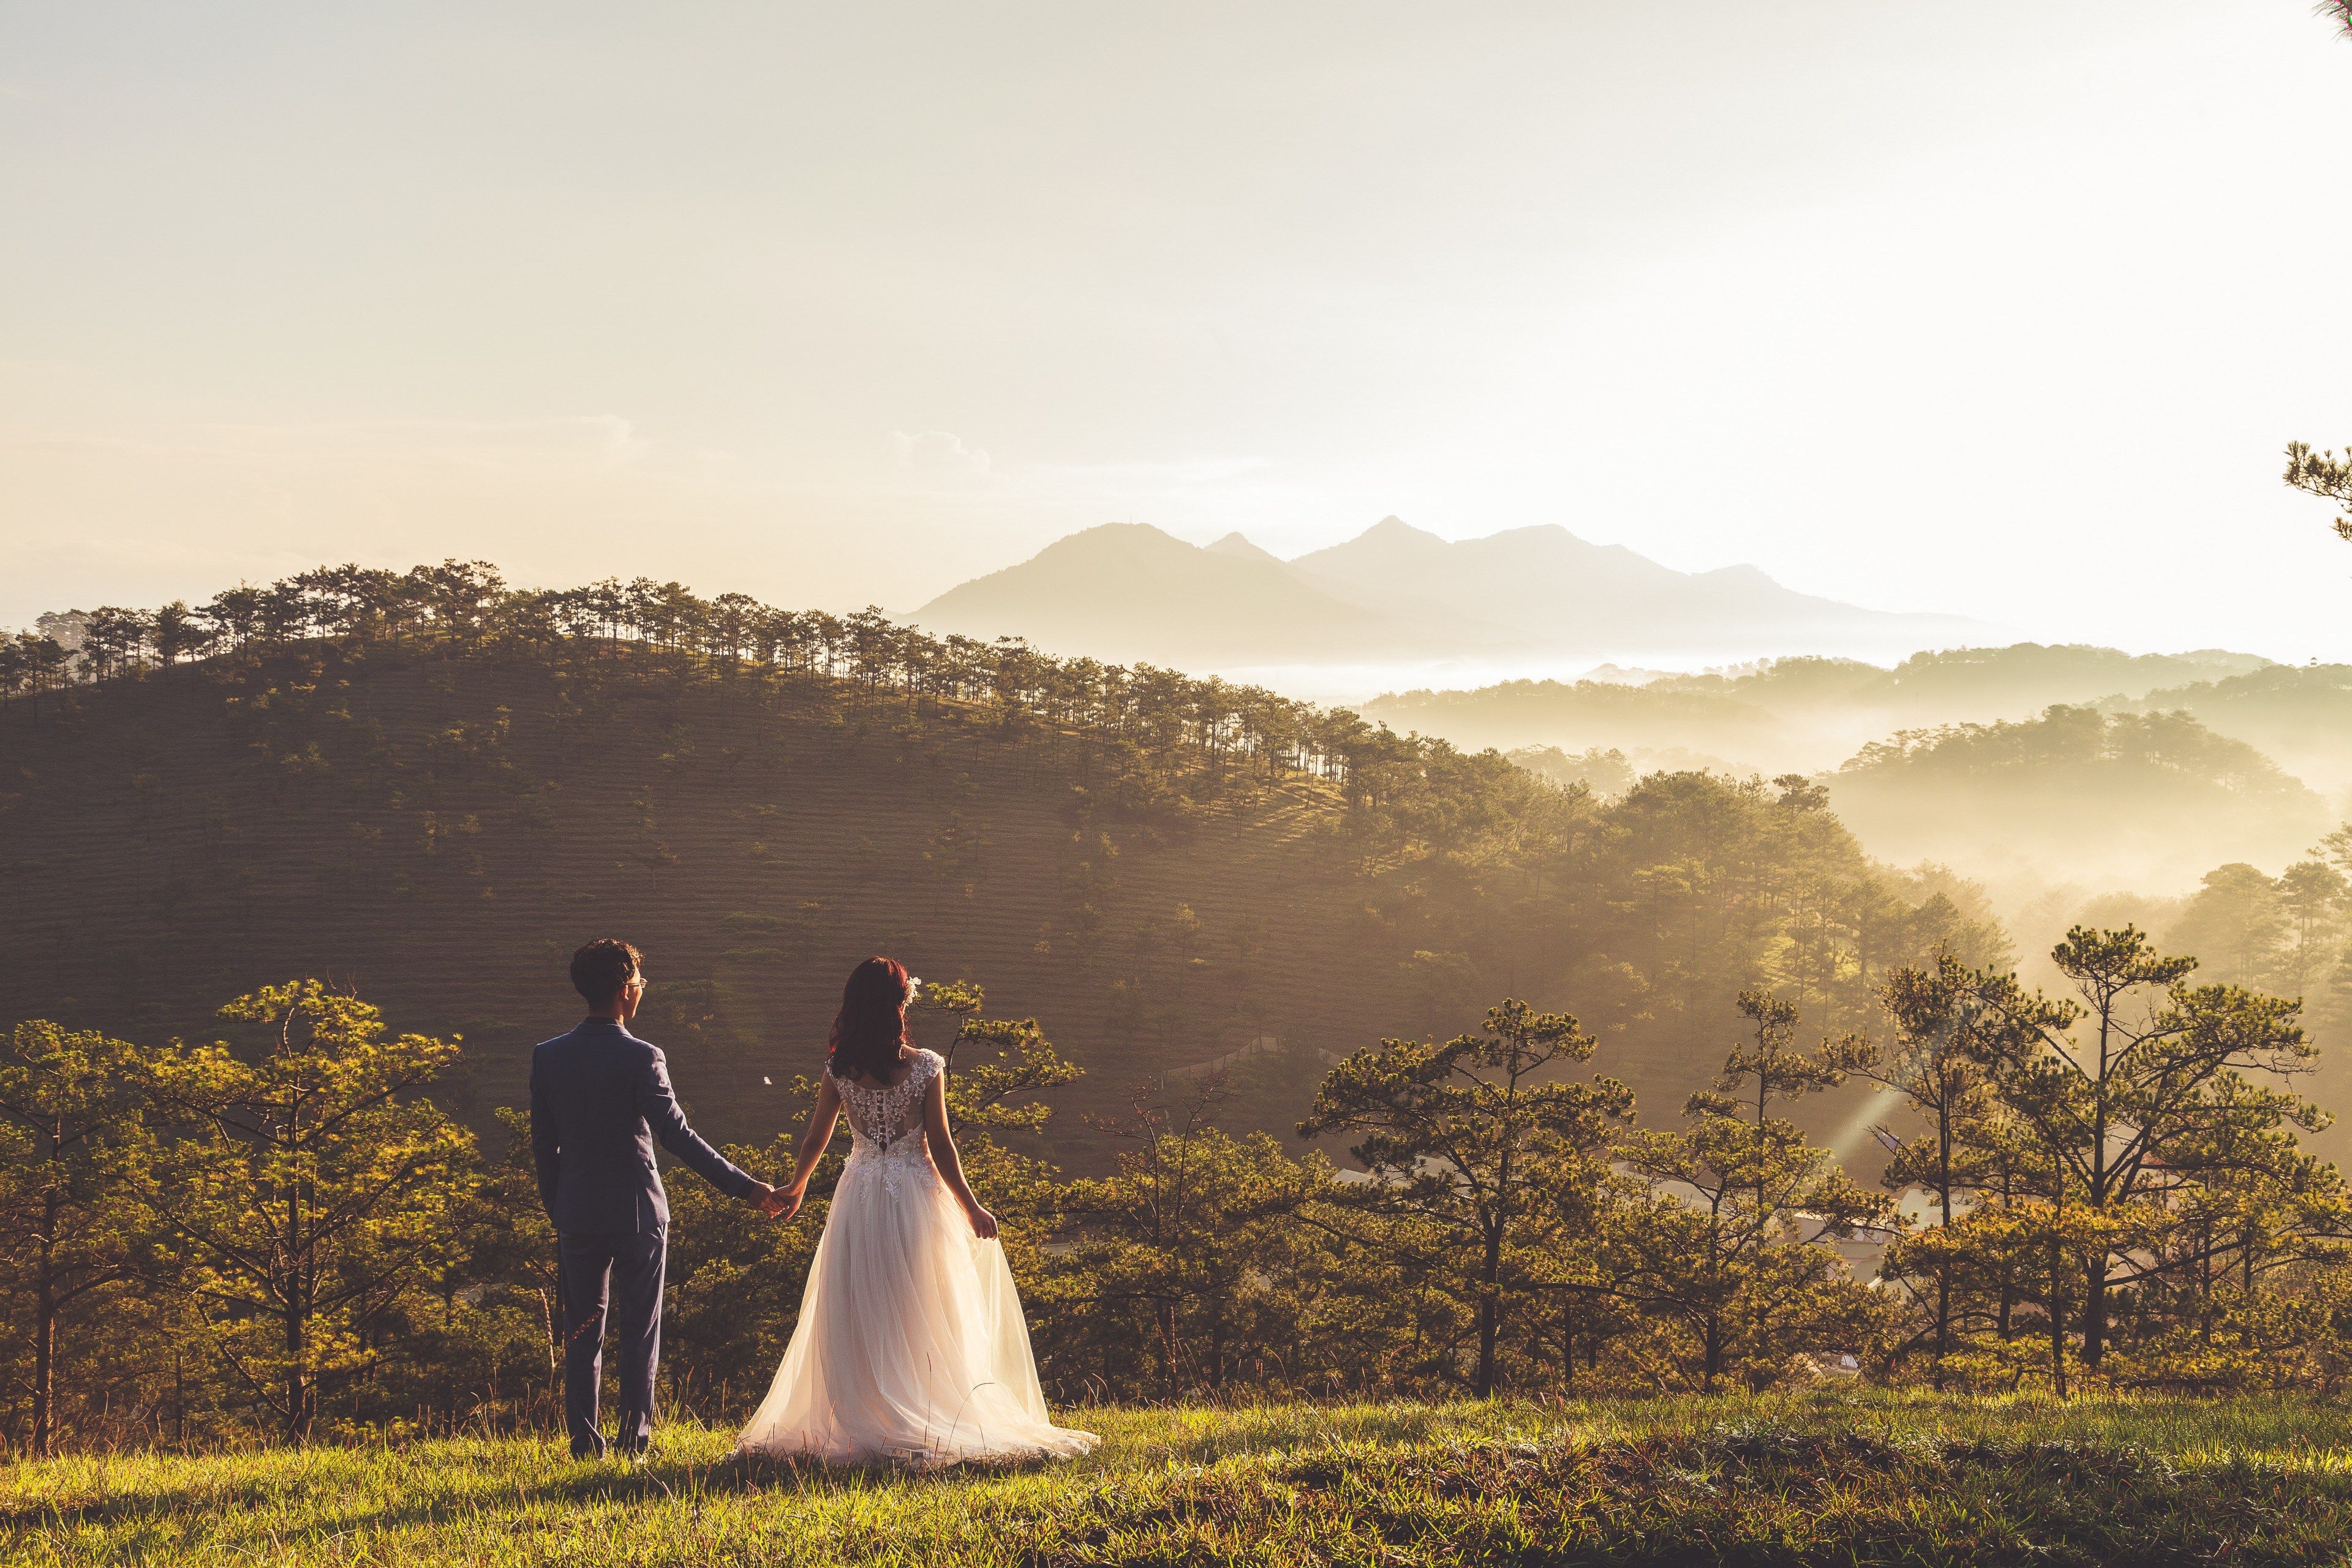 Wallpaper / a married couple holds hands looking into the distance in a grassy wooded area in the dalat hills, wedding couple dalat mountains 4k wallpaper